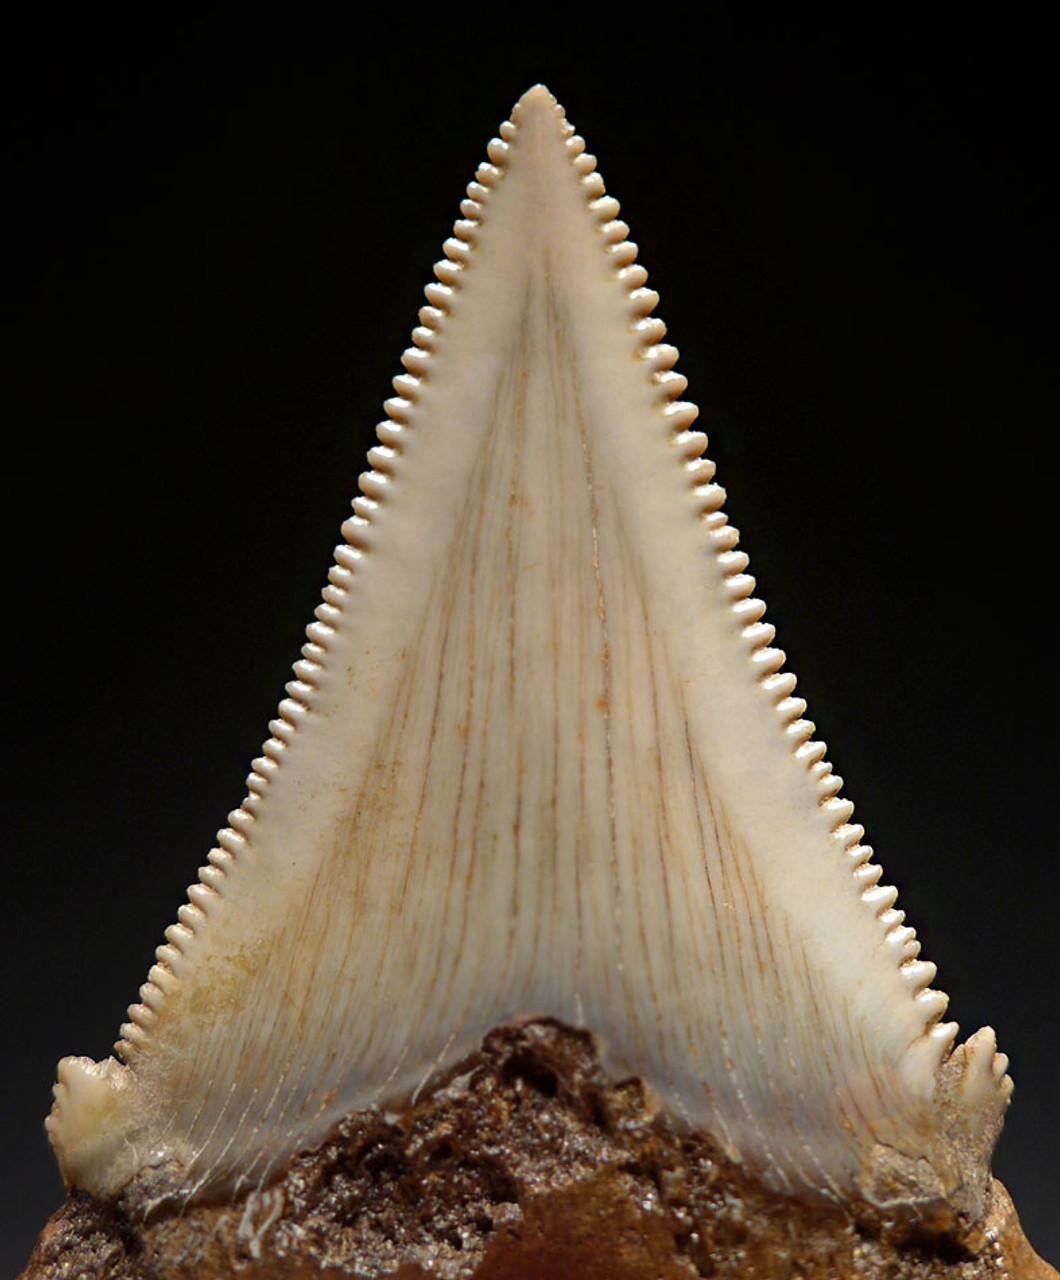 SHX049 - COLLECTOR GRADE CARCHAROCLES ANGUSTIDENS FOSSIL SHARK TOOTH FROM THE LOWER JAW